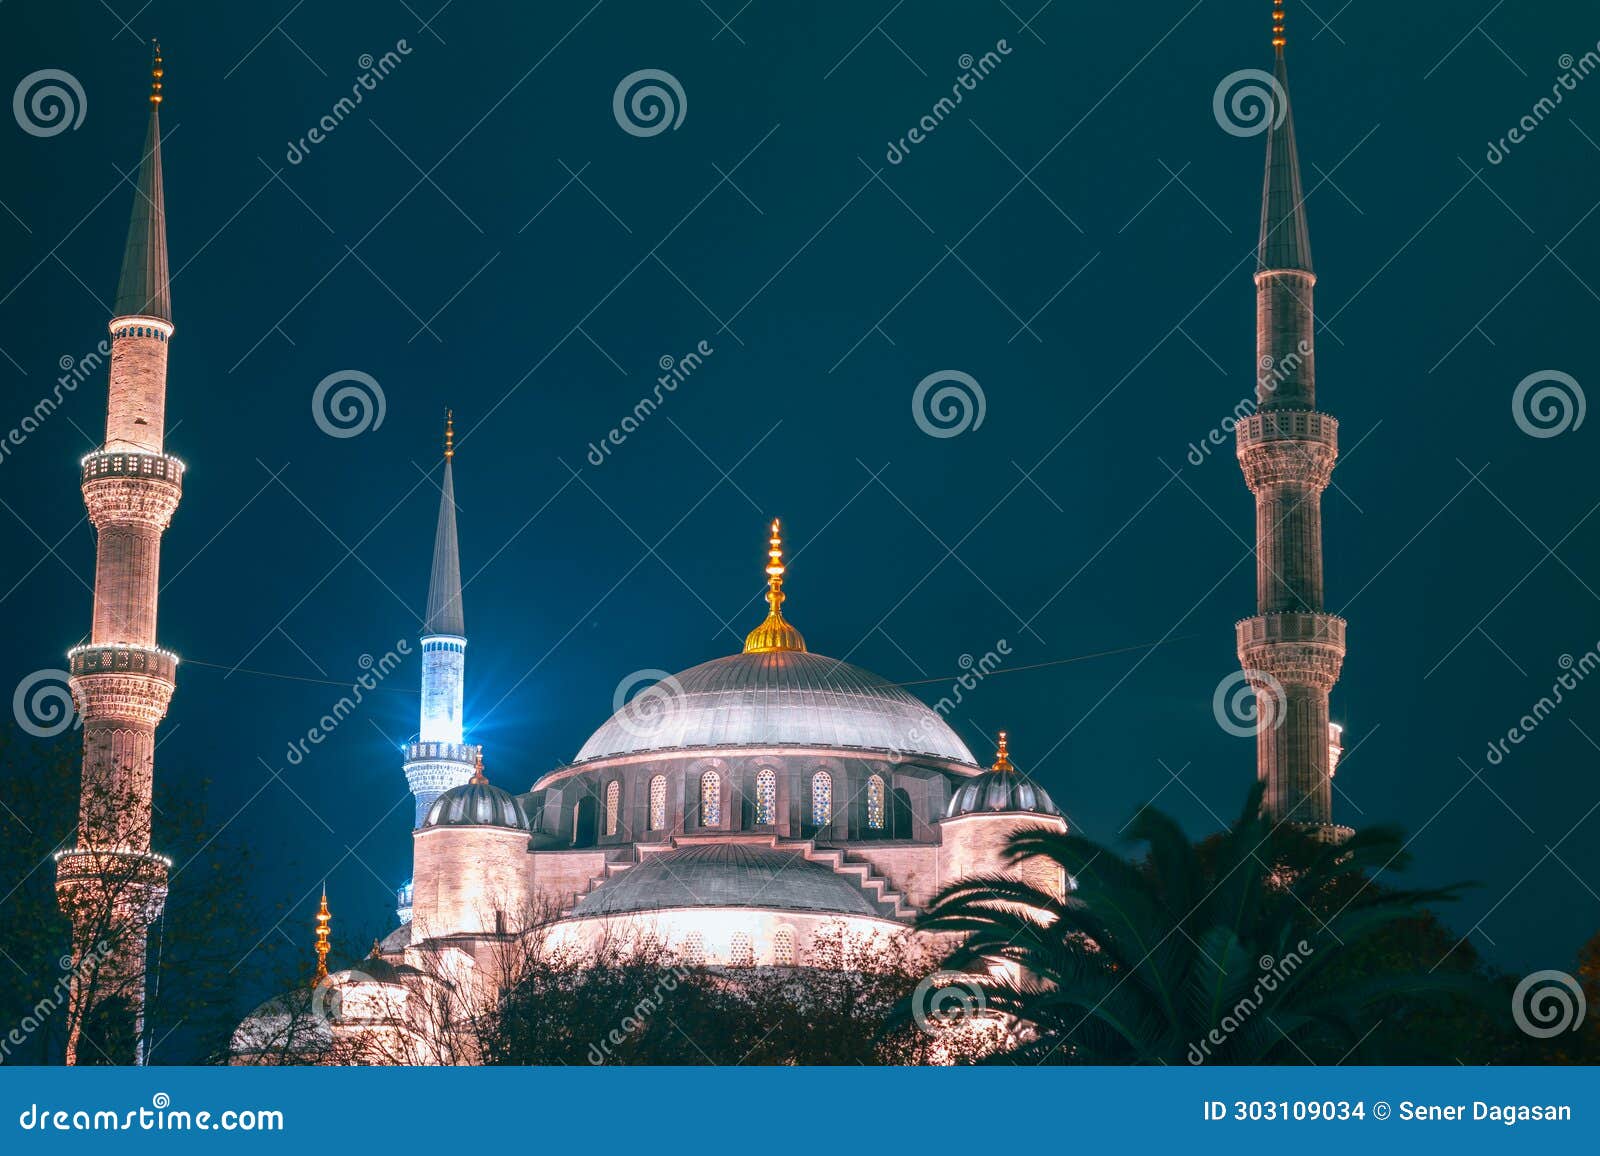 islamic or ramadan concept photo. dome and minaretes of blue mosque at night